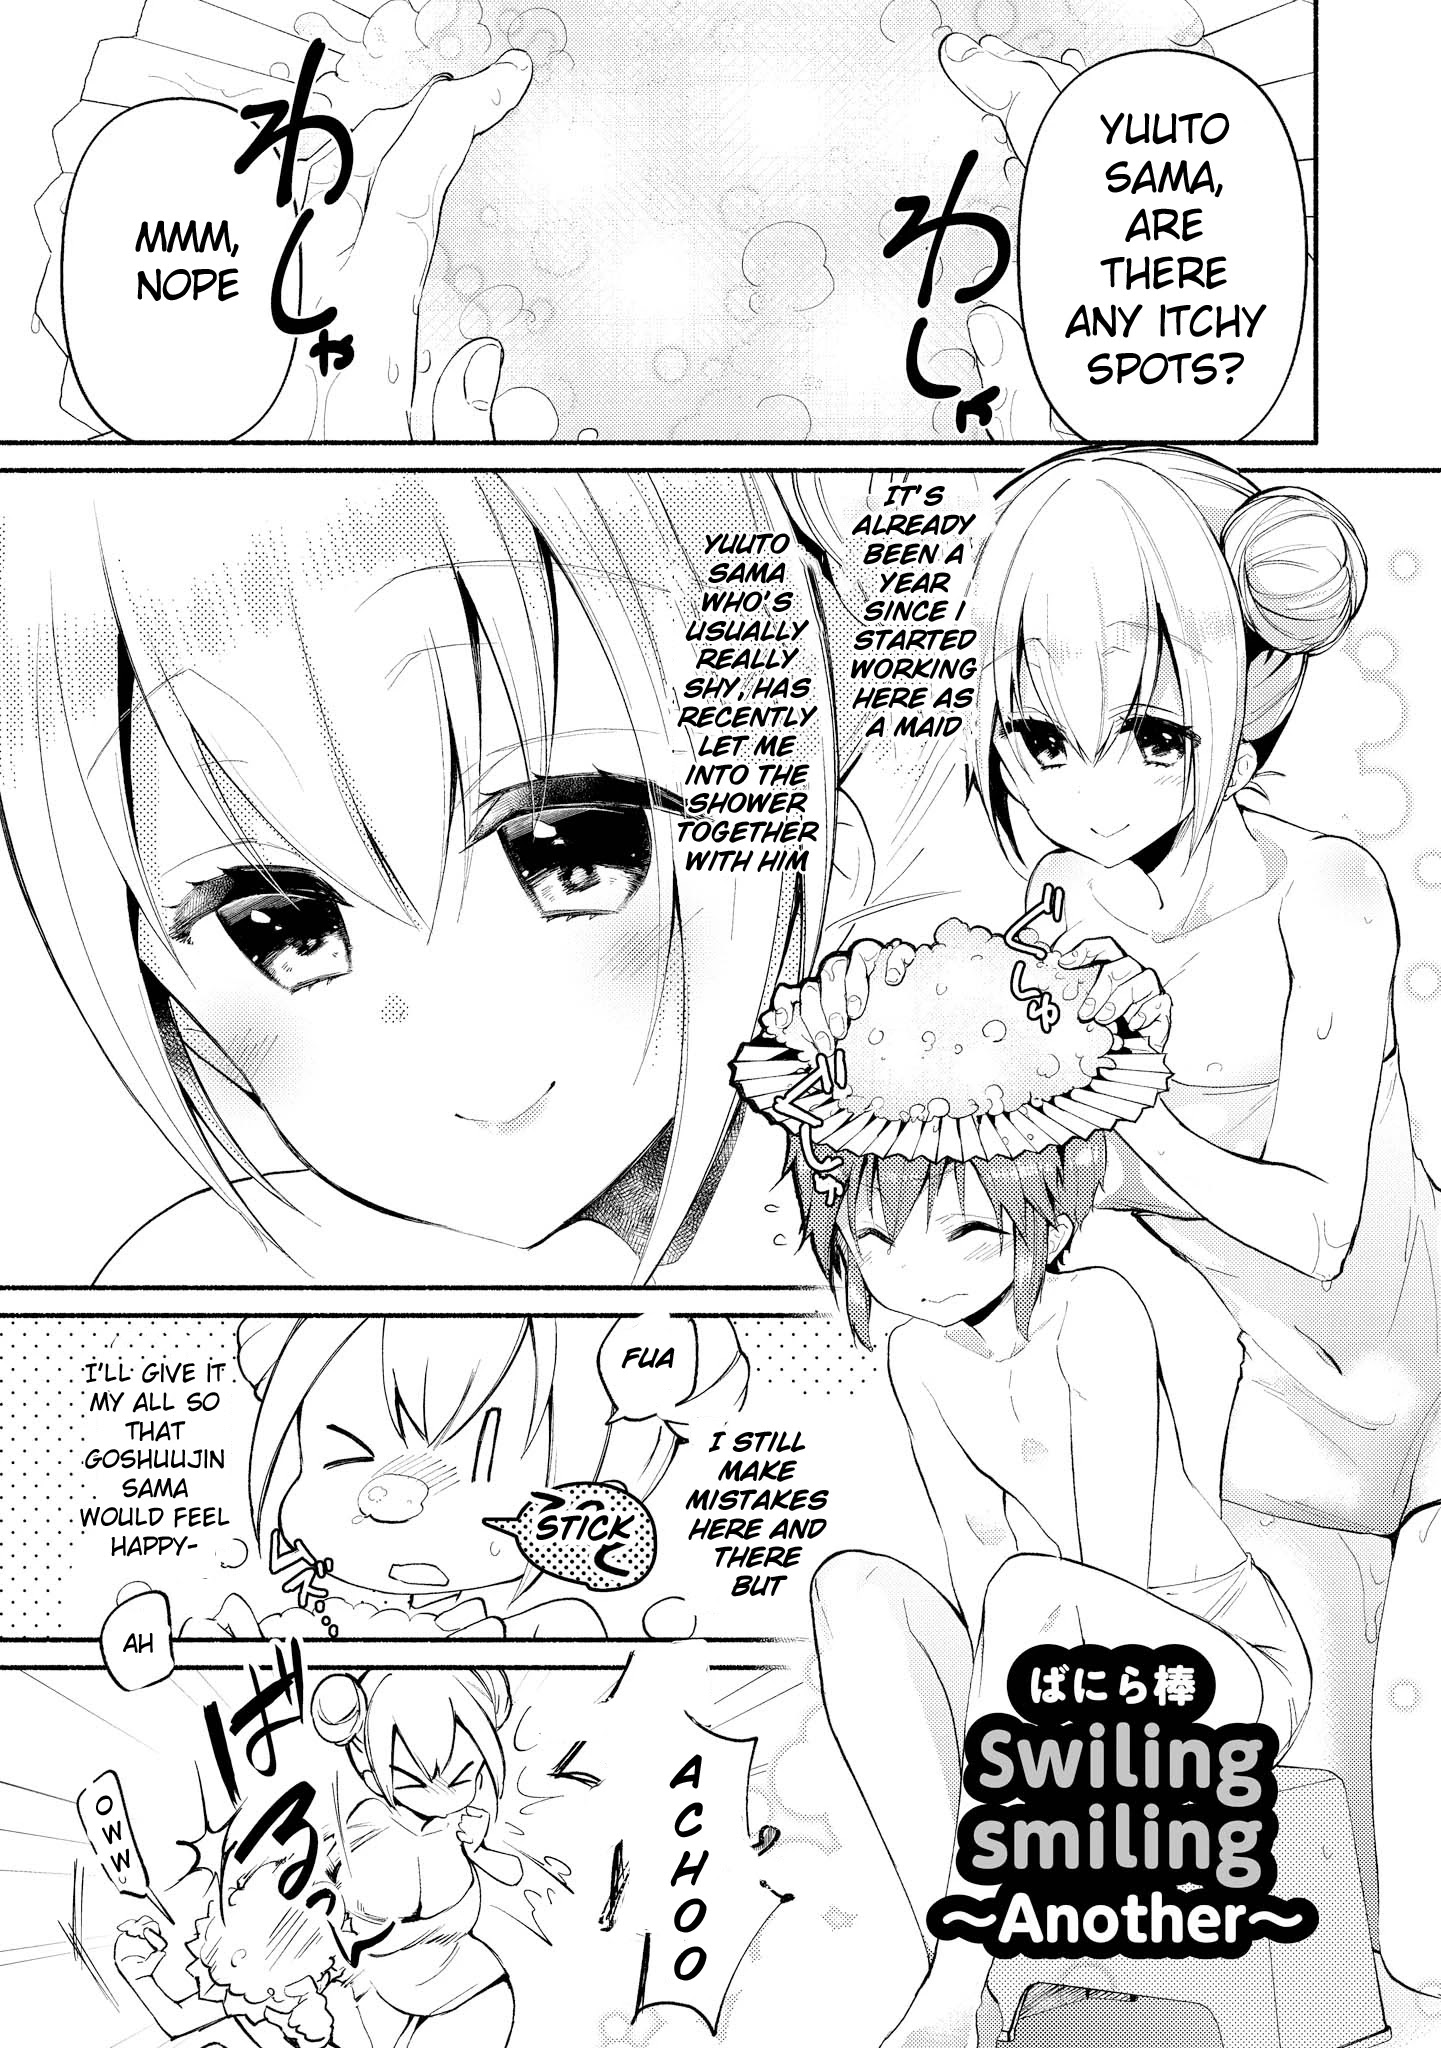 Do You Like Fluffy Boobs? Busty Girl Anthology Comic Chapter 25: Swiling Smiling ~Another~ By Vanillabow - Picture 2